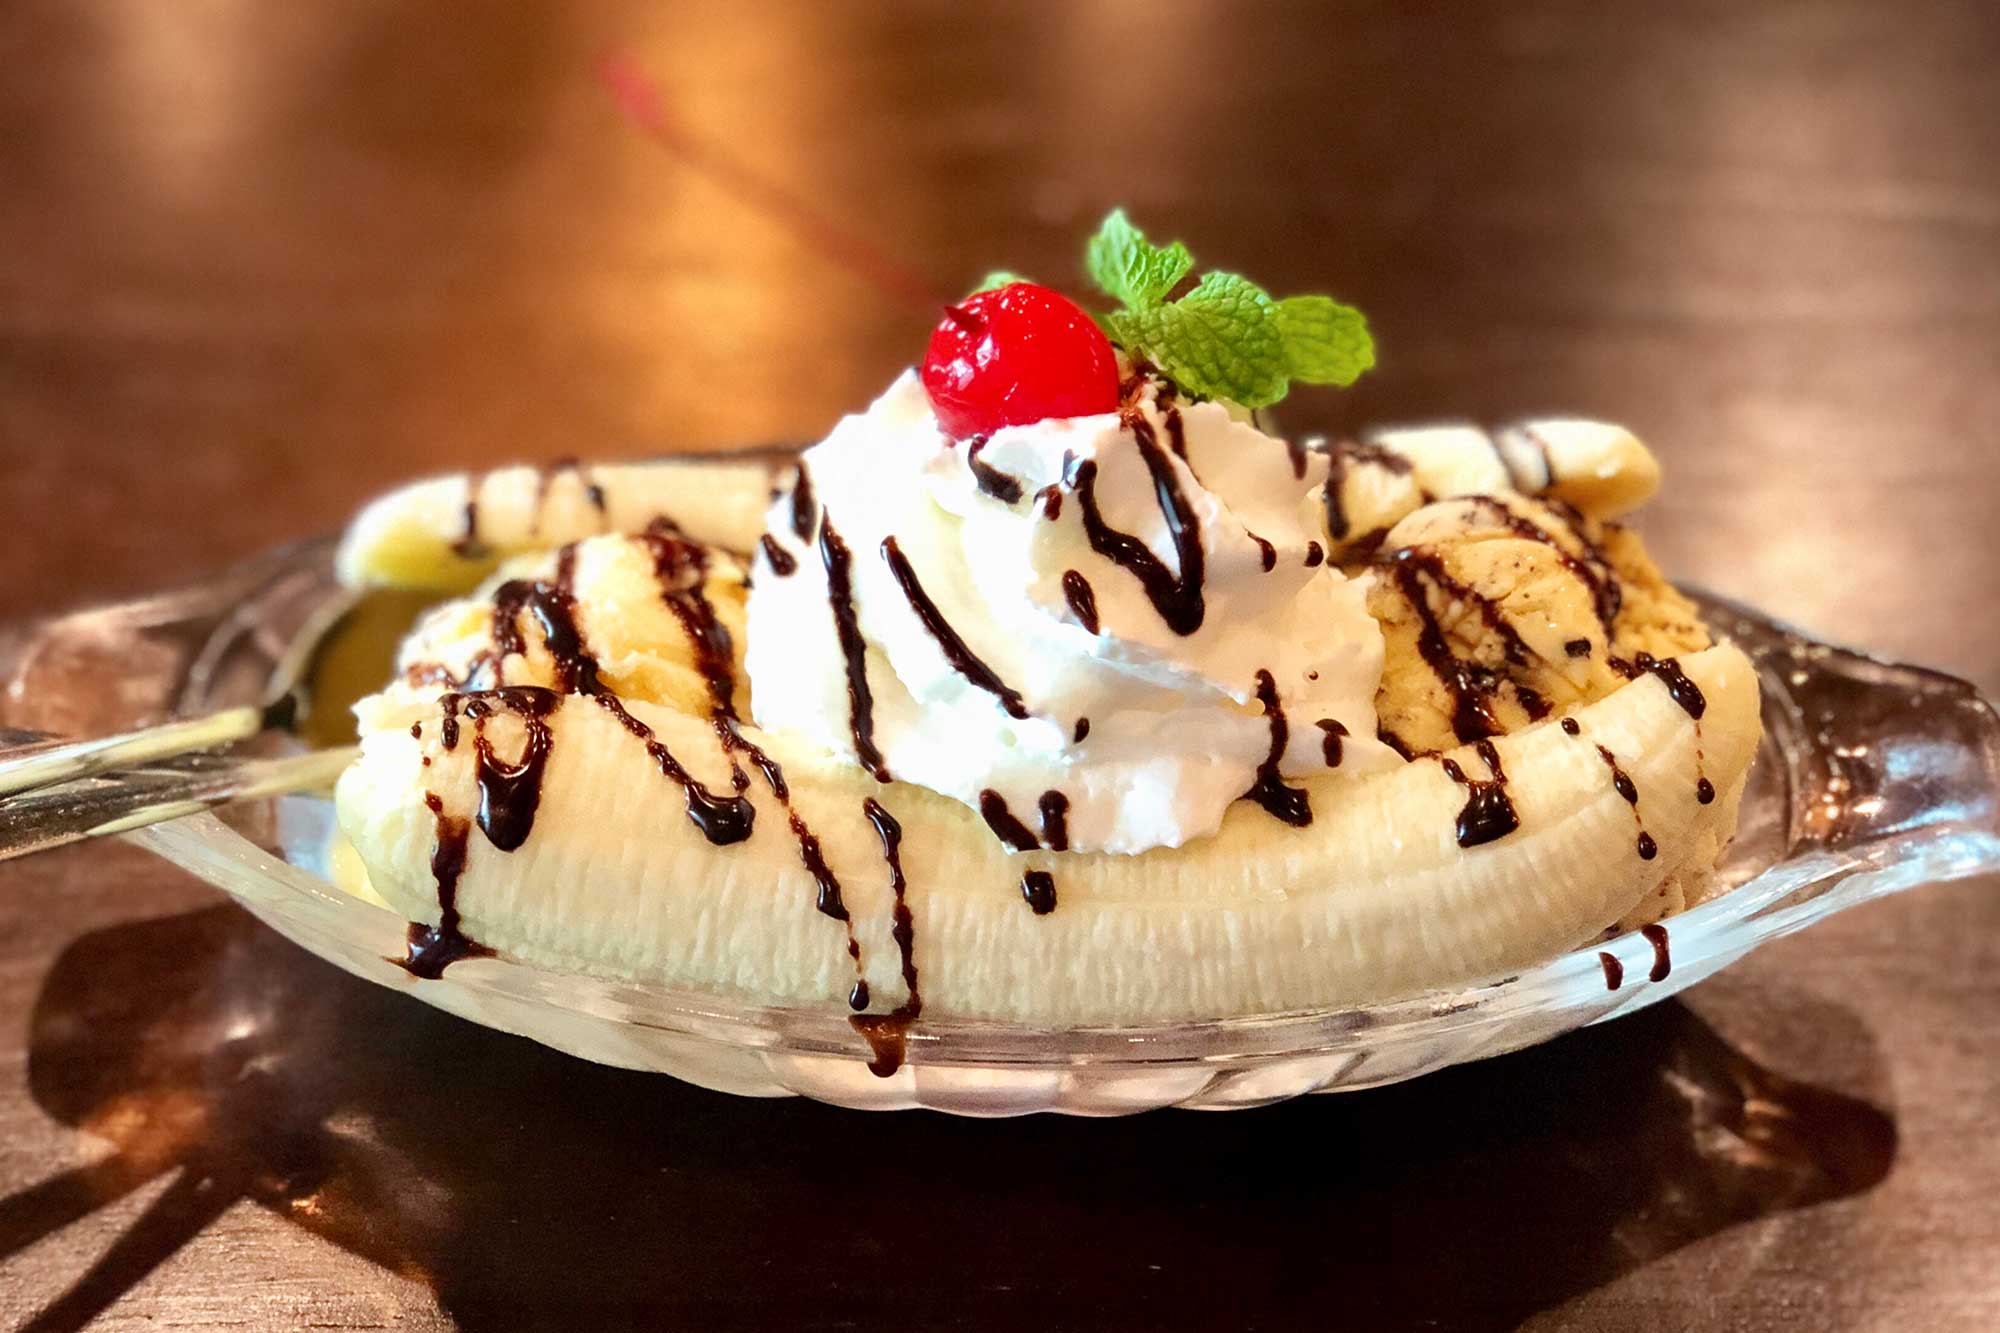 charlie chapman recommends pictures of a banana split pic